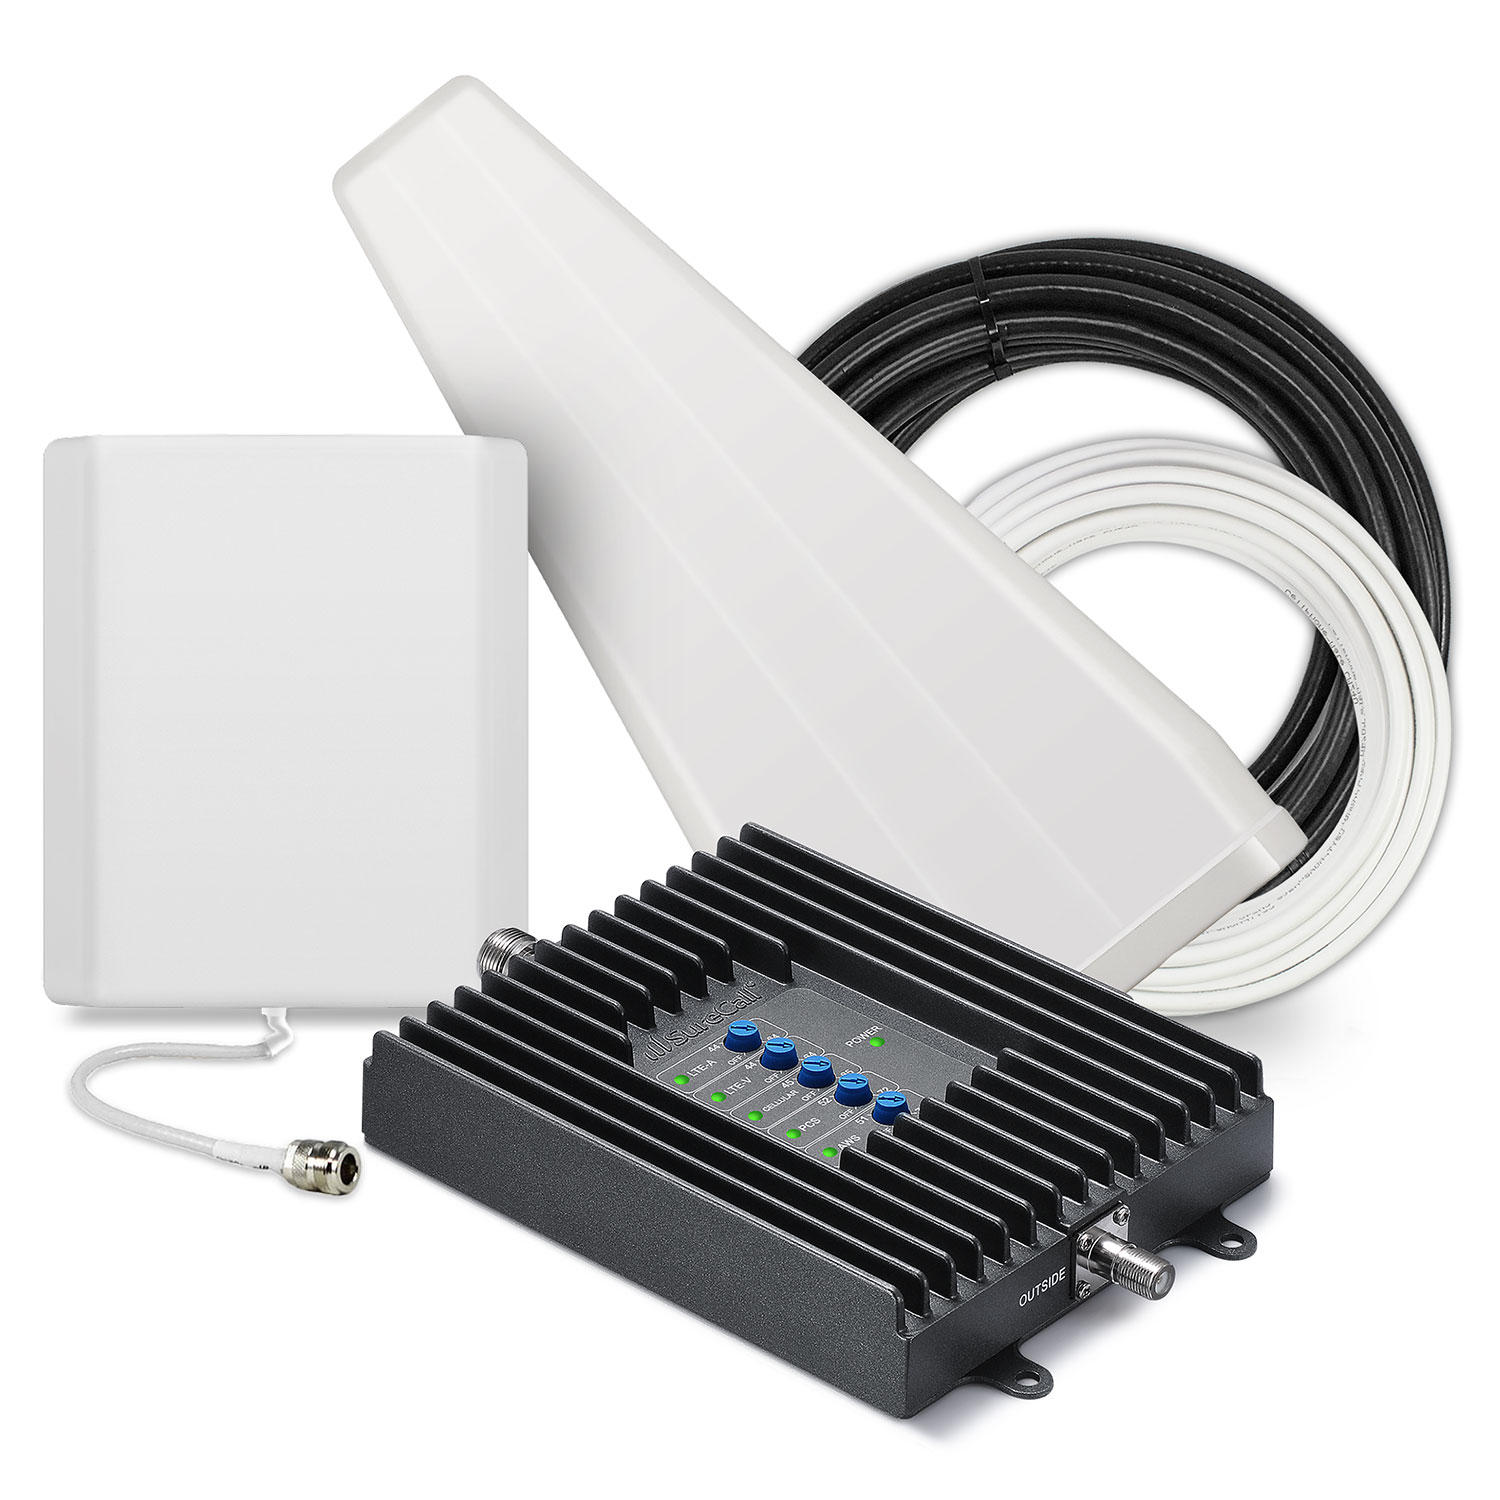 Fusion4Home High-Performance Cell Phone Signal Booster on sale for $249 at Sam's Club - $399 item!!! $249.99